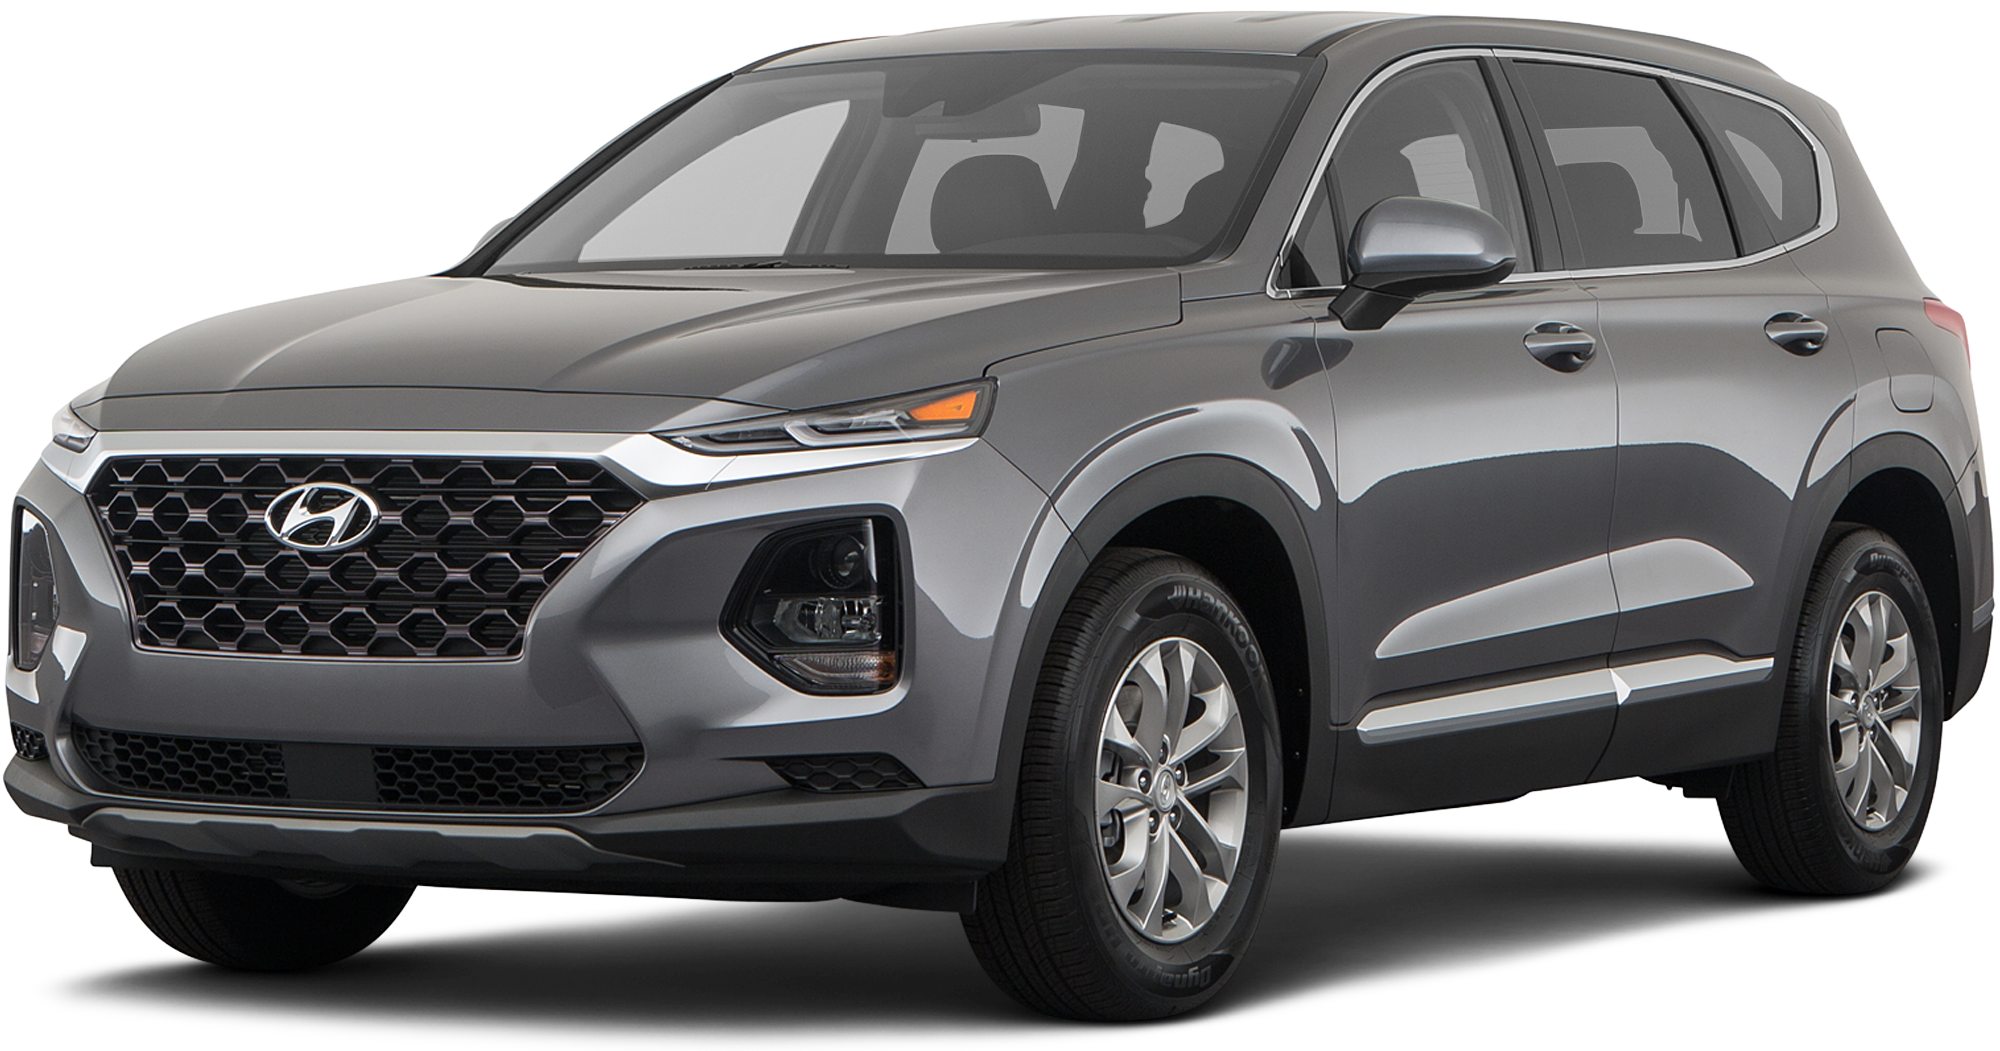 2020-hyundai-santa-fe-incentives-specials-offers-in-wilkes-barre-pa